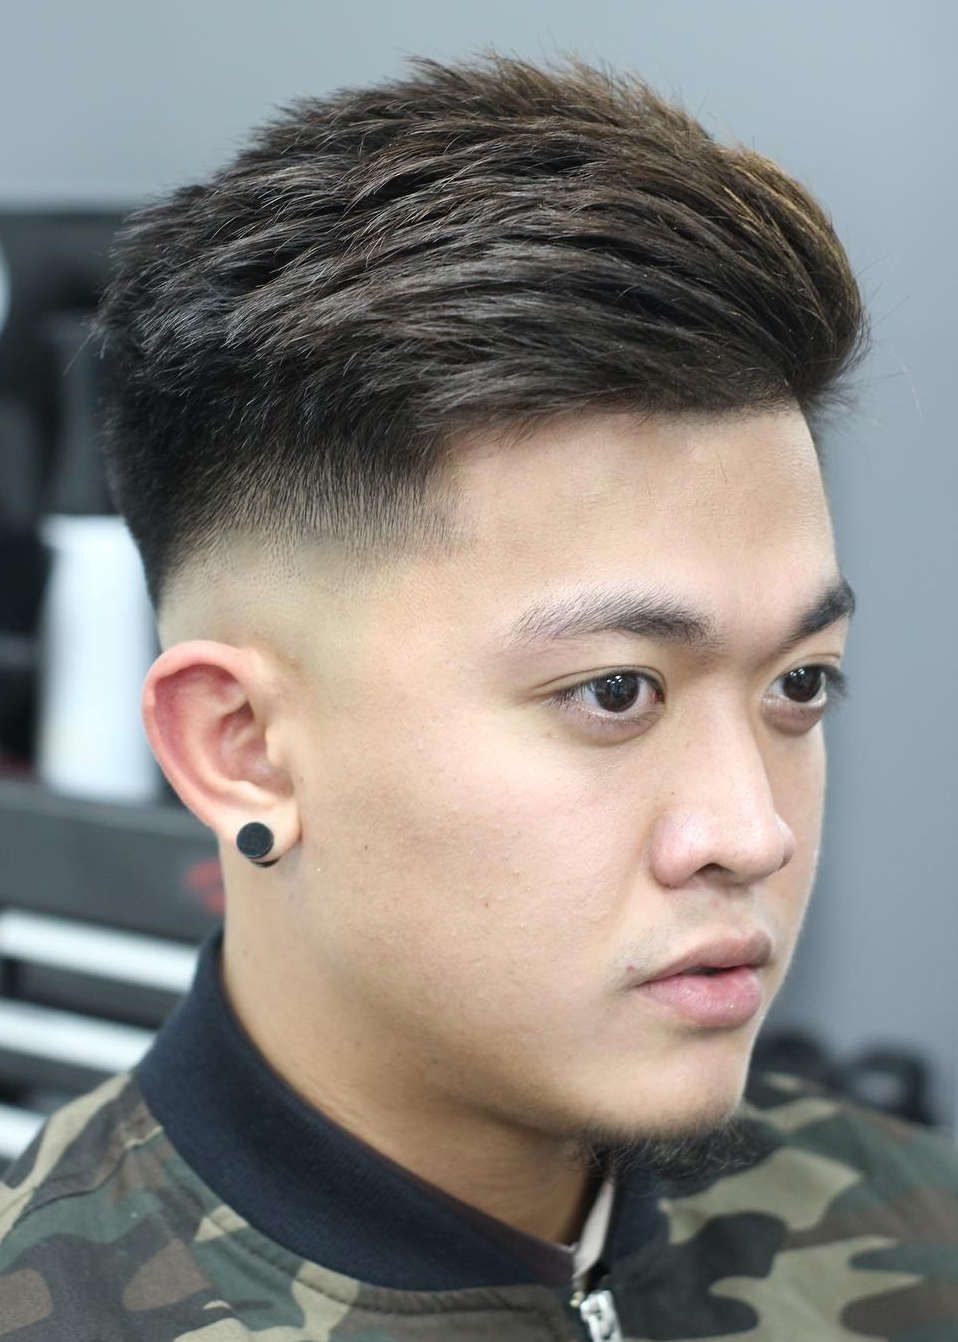 Top 30 Trendy Asian Men Hairstyles 2019 | Hair, Nails &amp;amp; Makeup within The best Asian Hairstyles 2019 Male